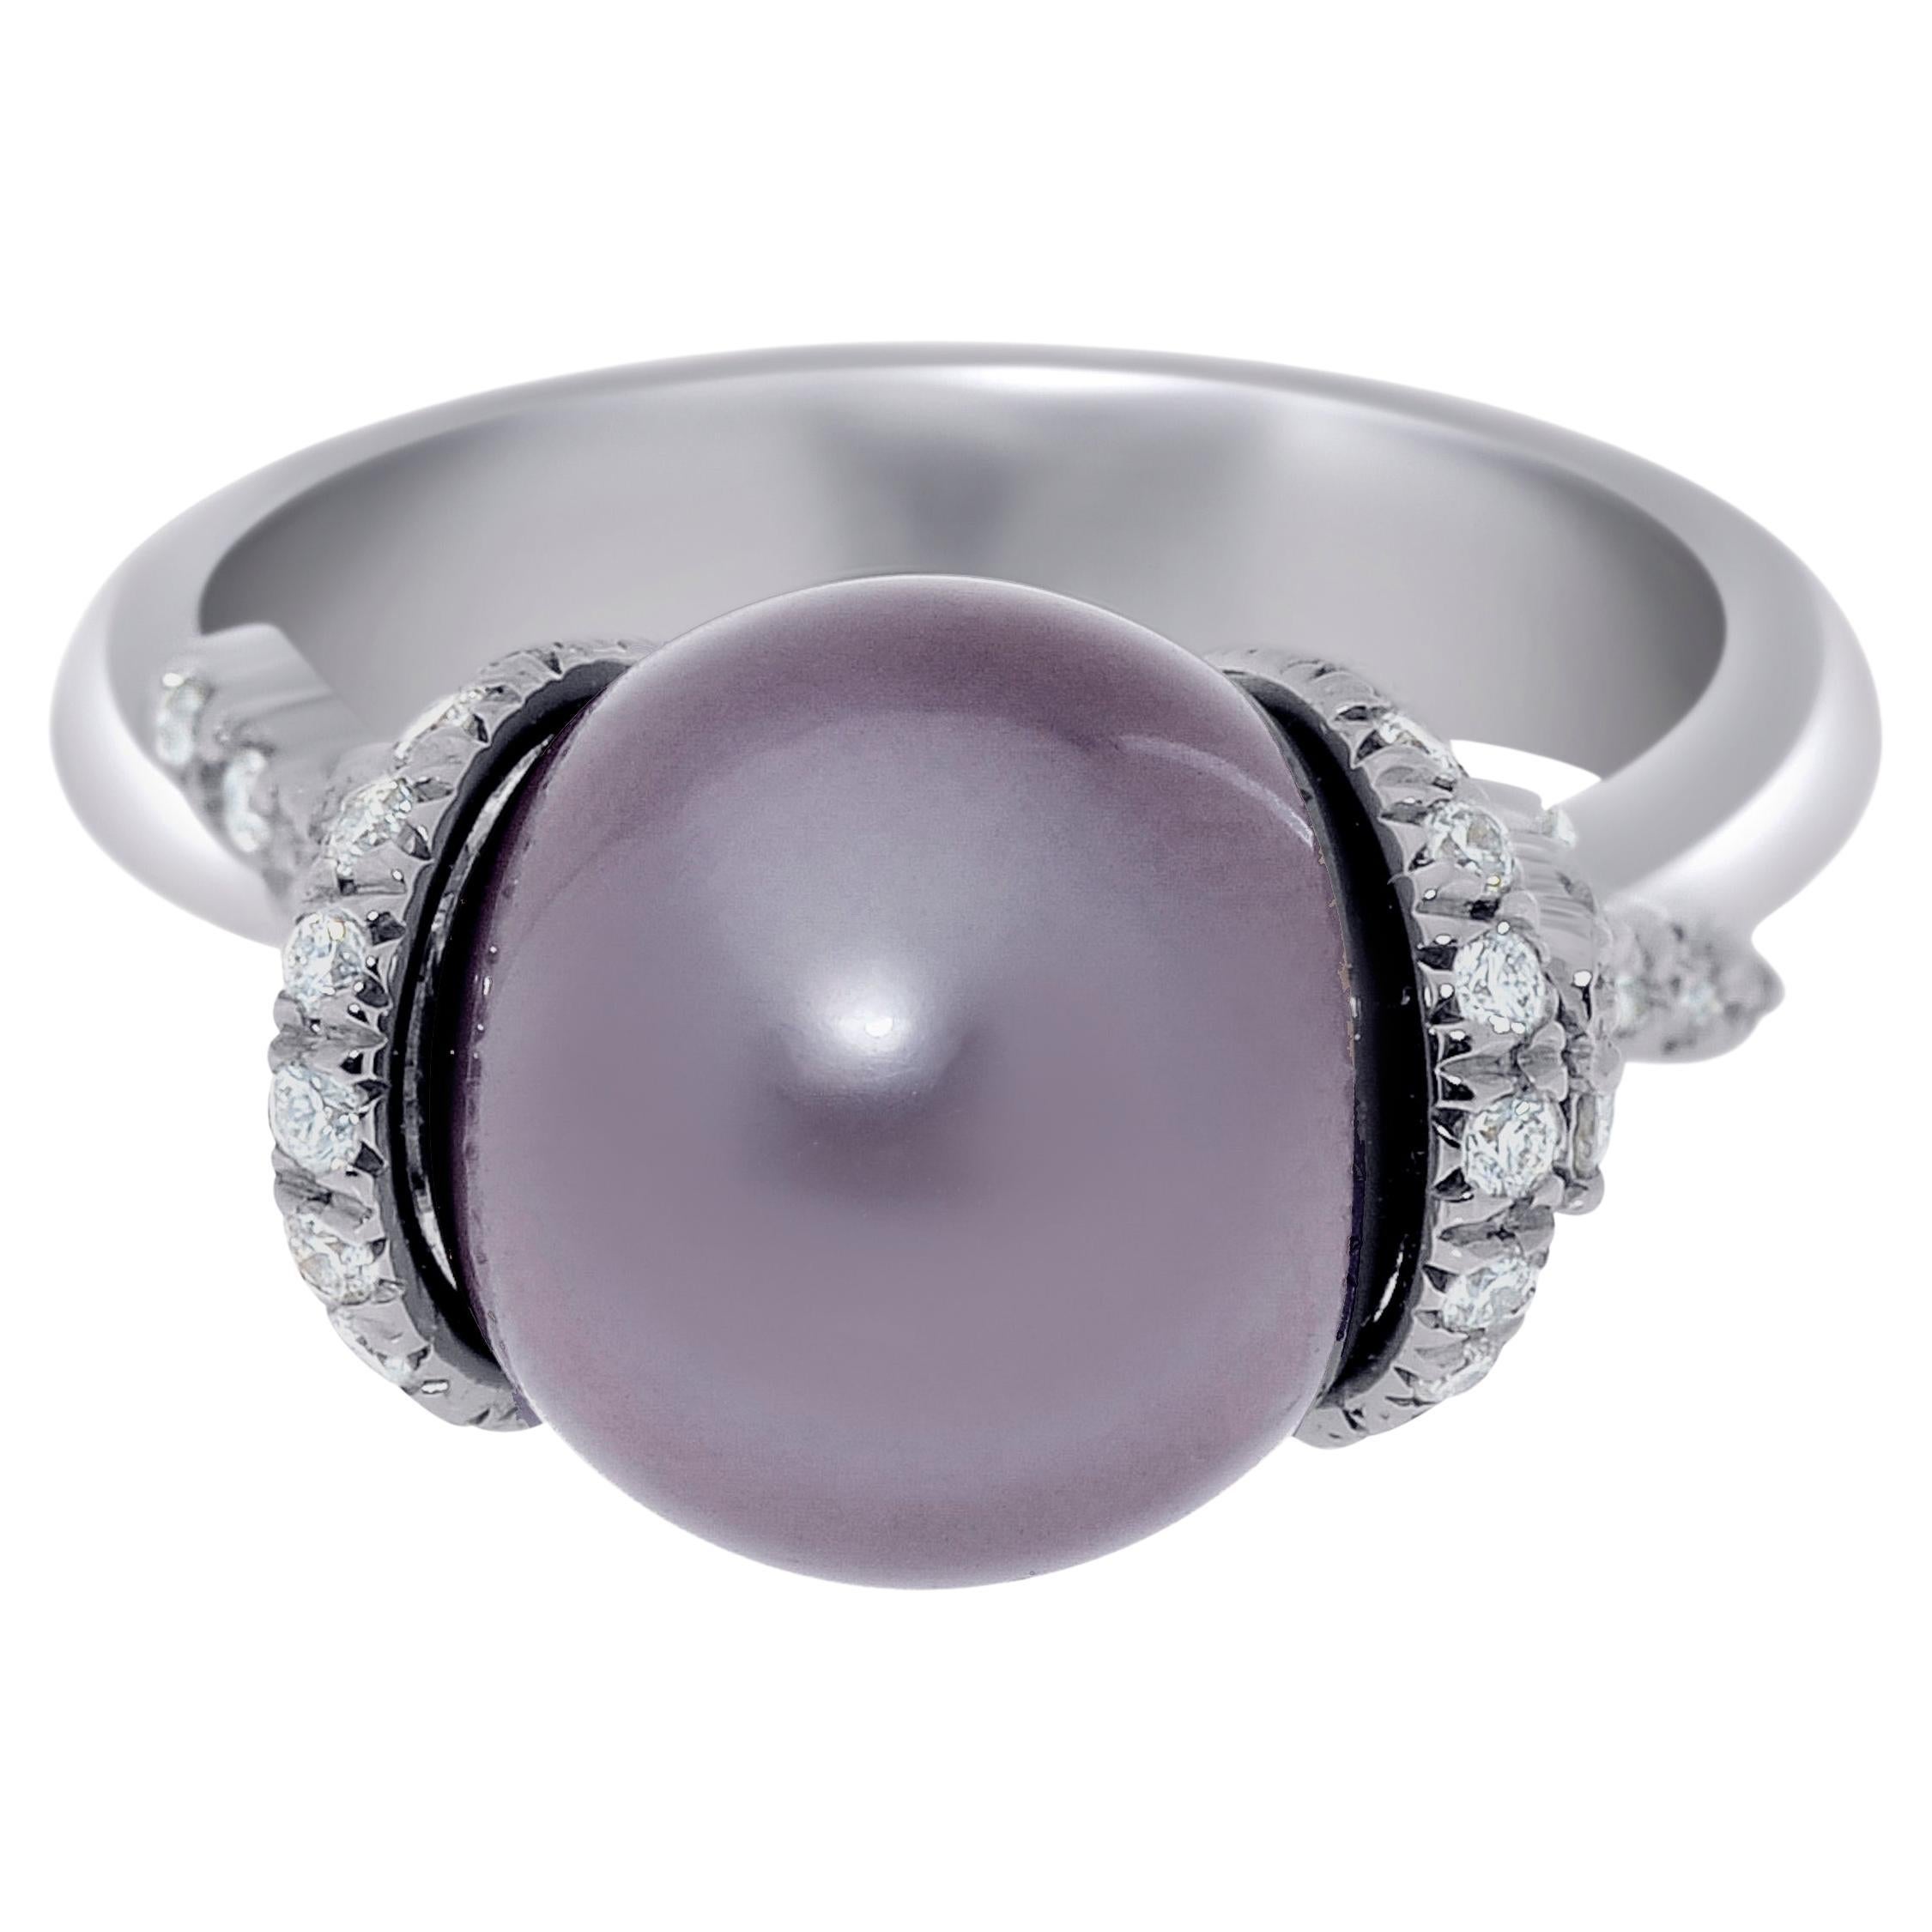 Zydo 18K White Gold, White Diamond and Pearl Band Ring sz. For Sale